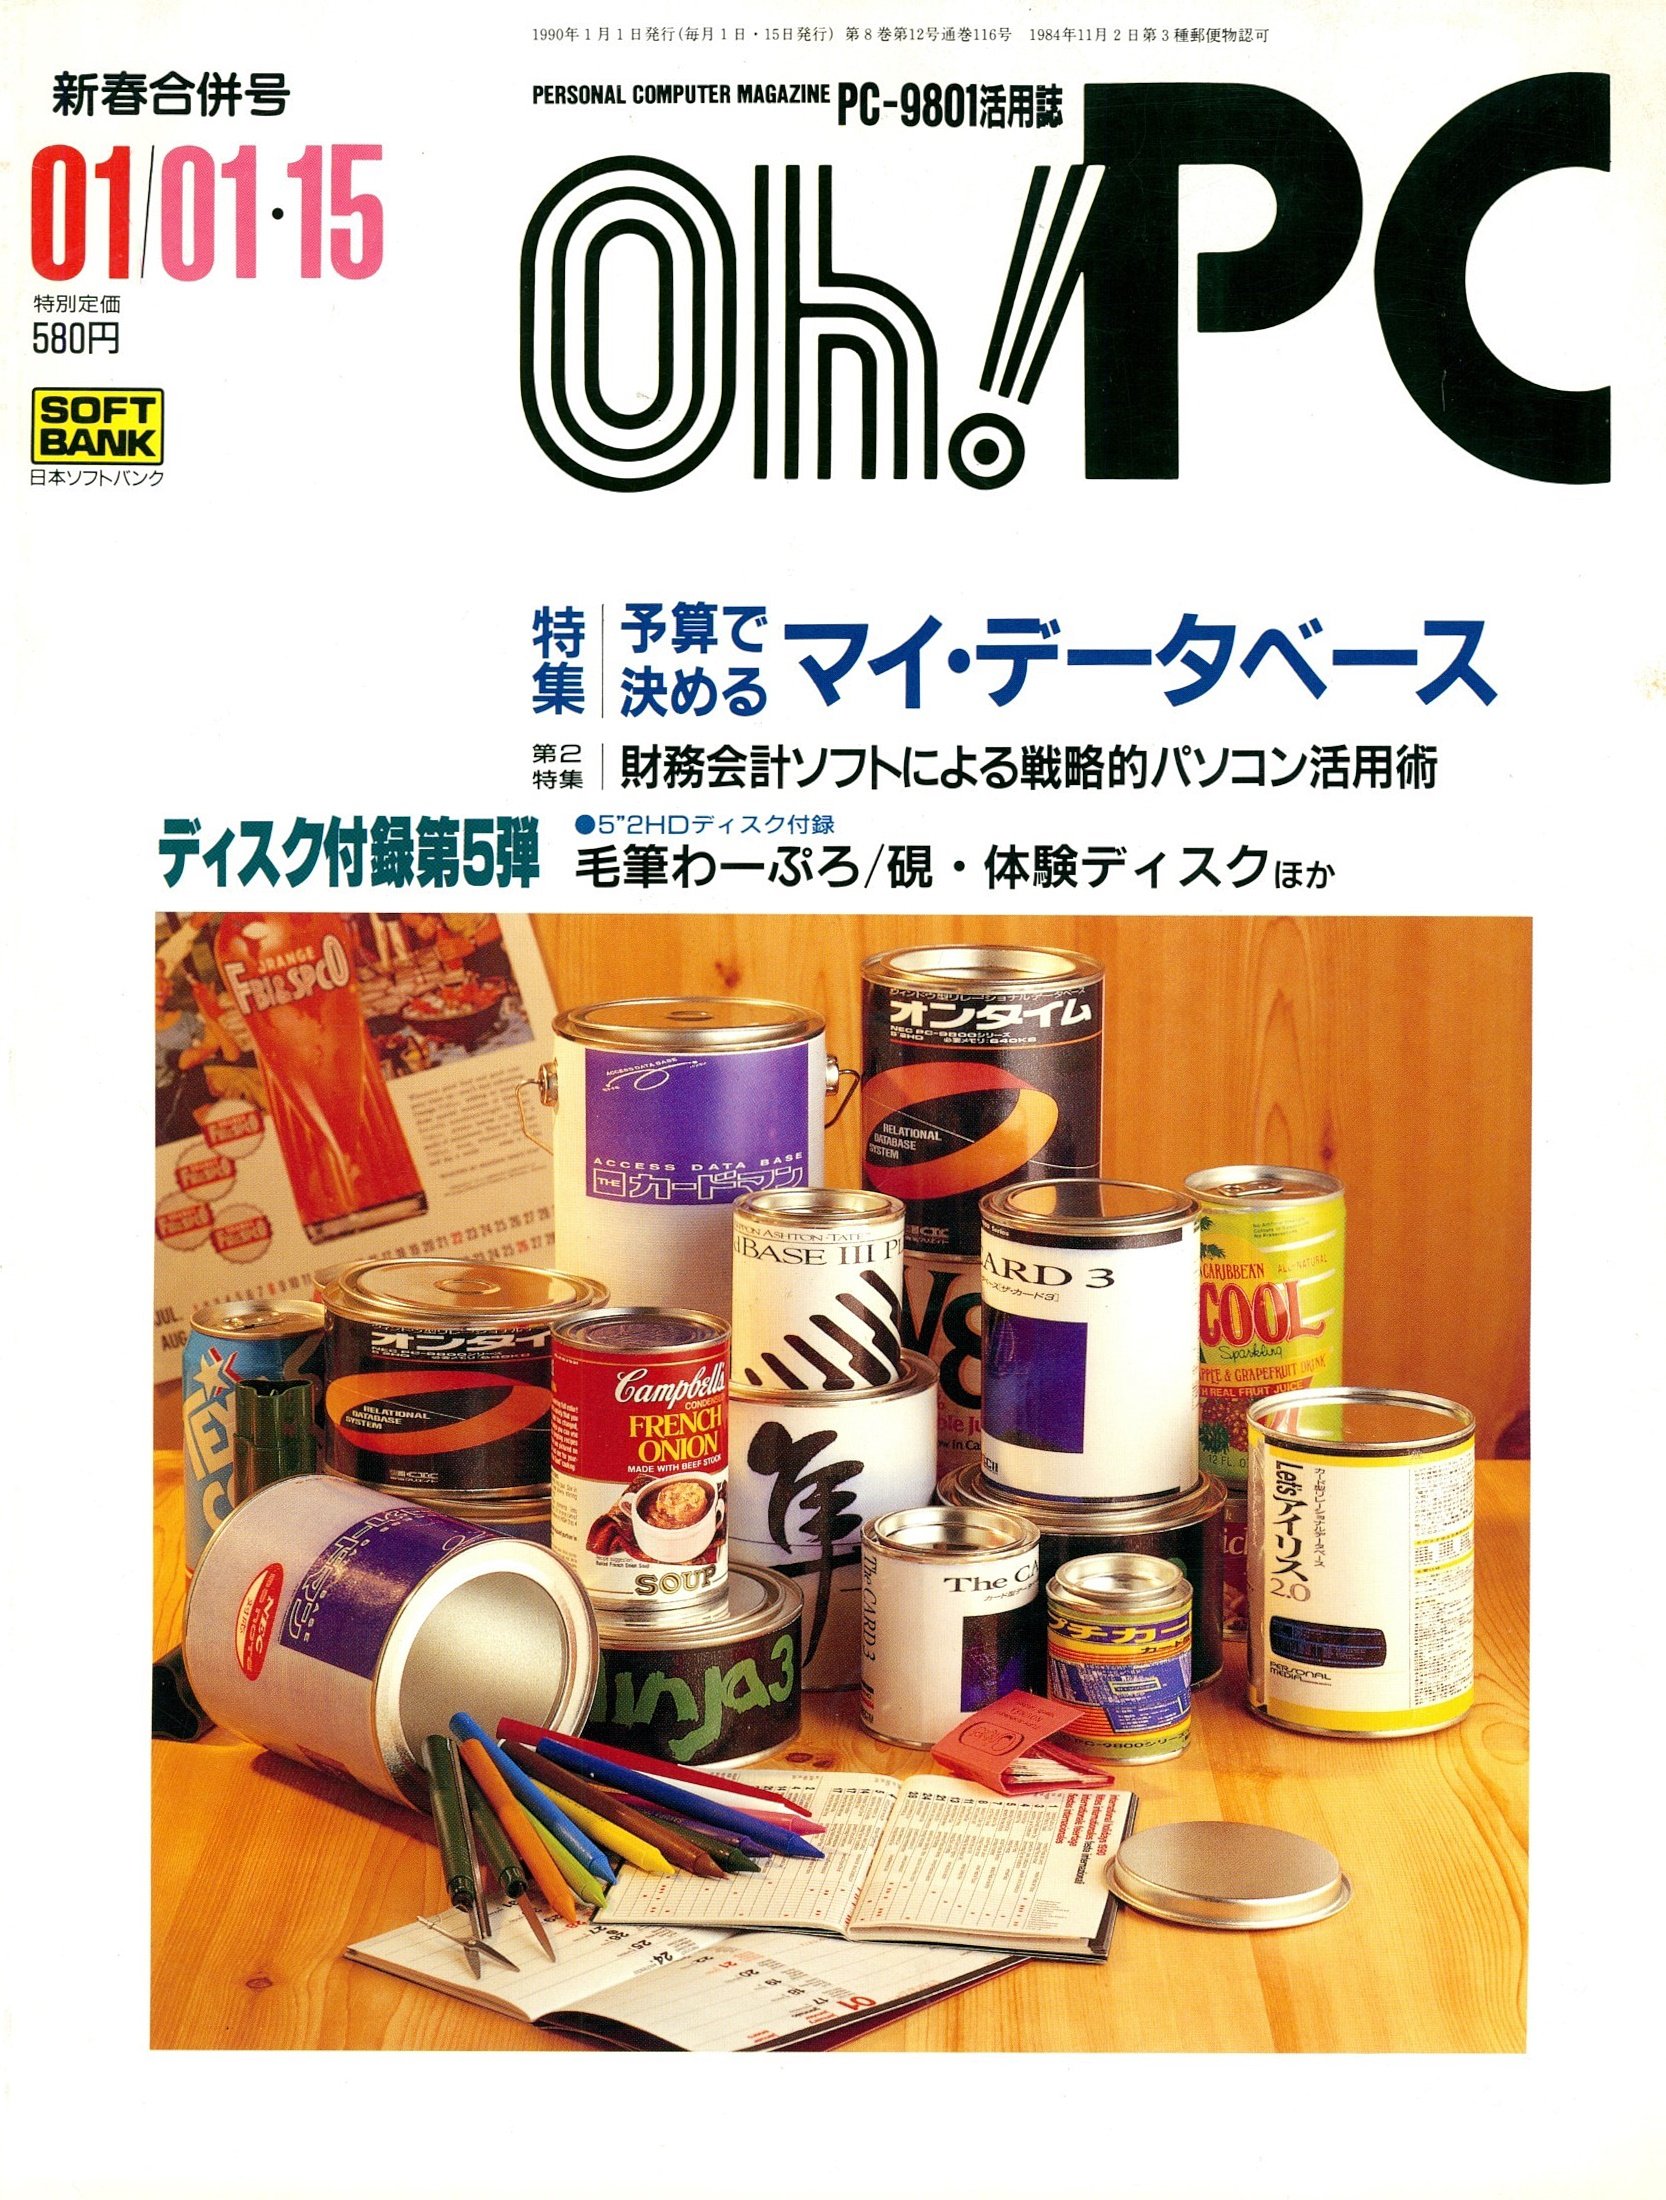 Oh! PC Issue 116 (Jan 01-15, 1990)